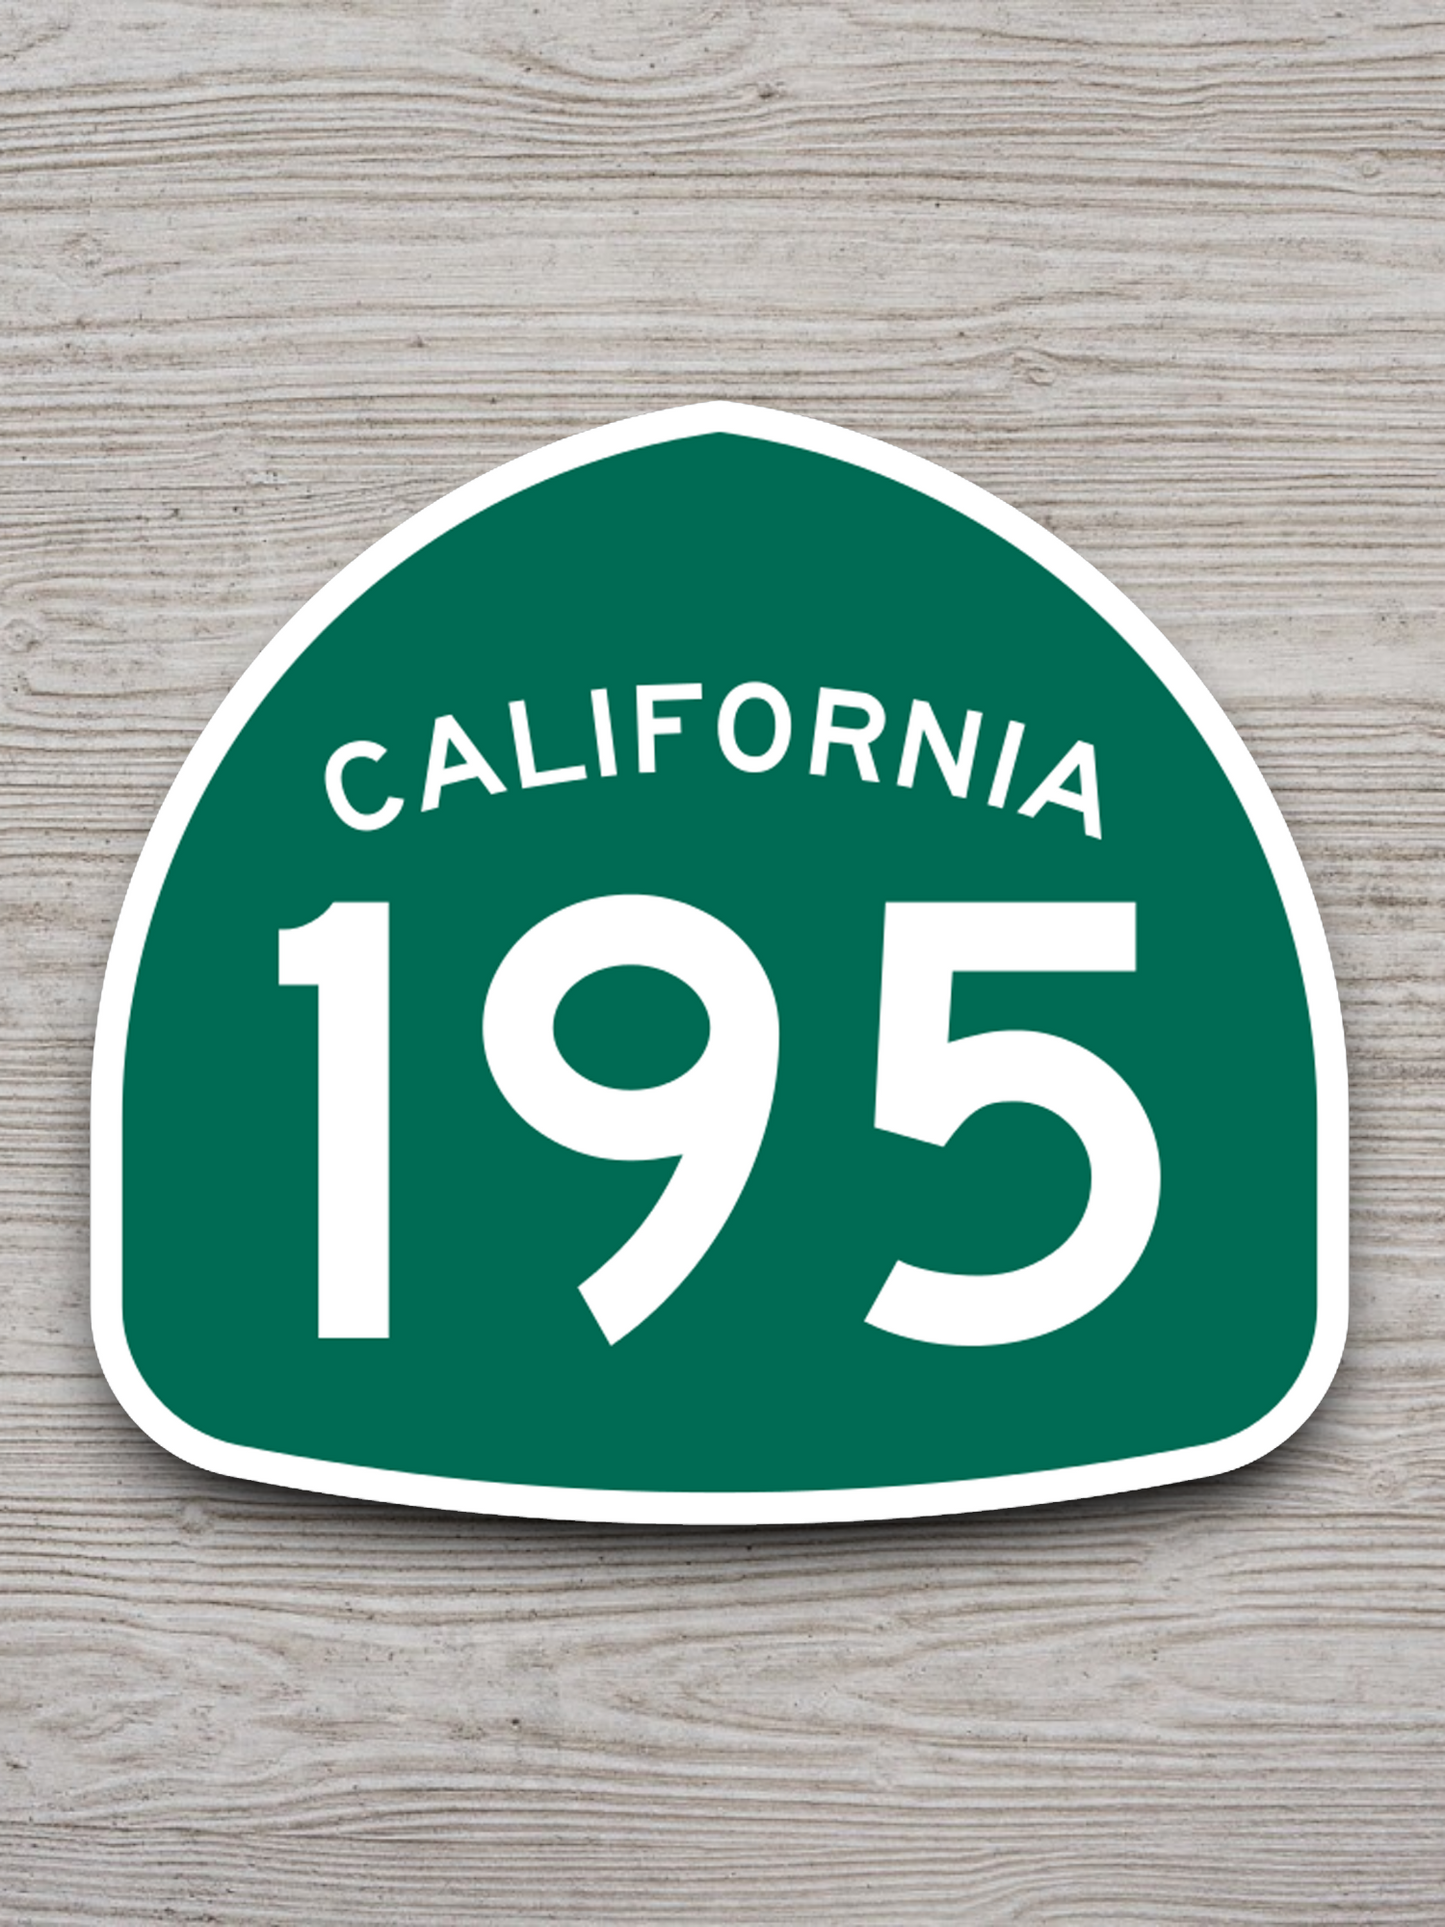 California State Route 195 Road Sign Sticker